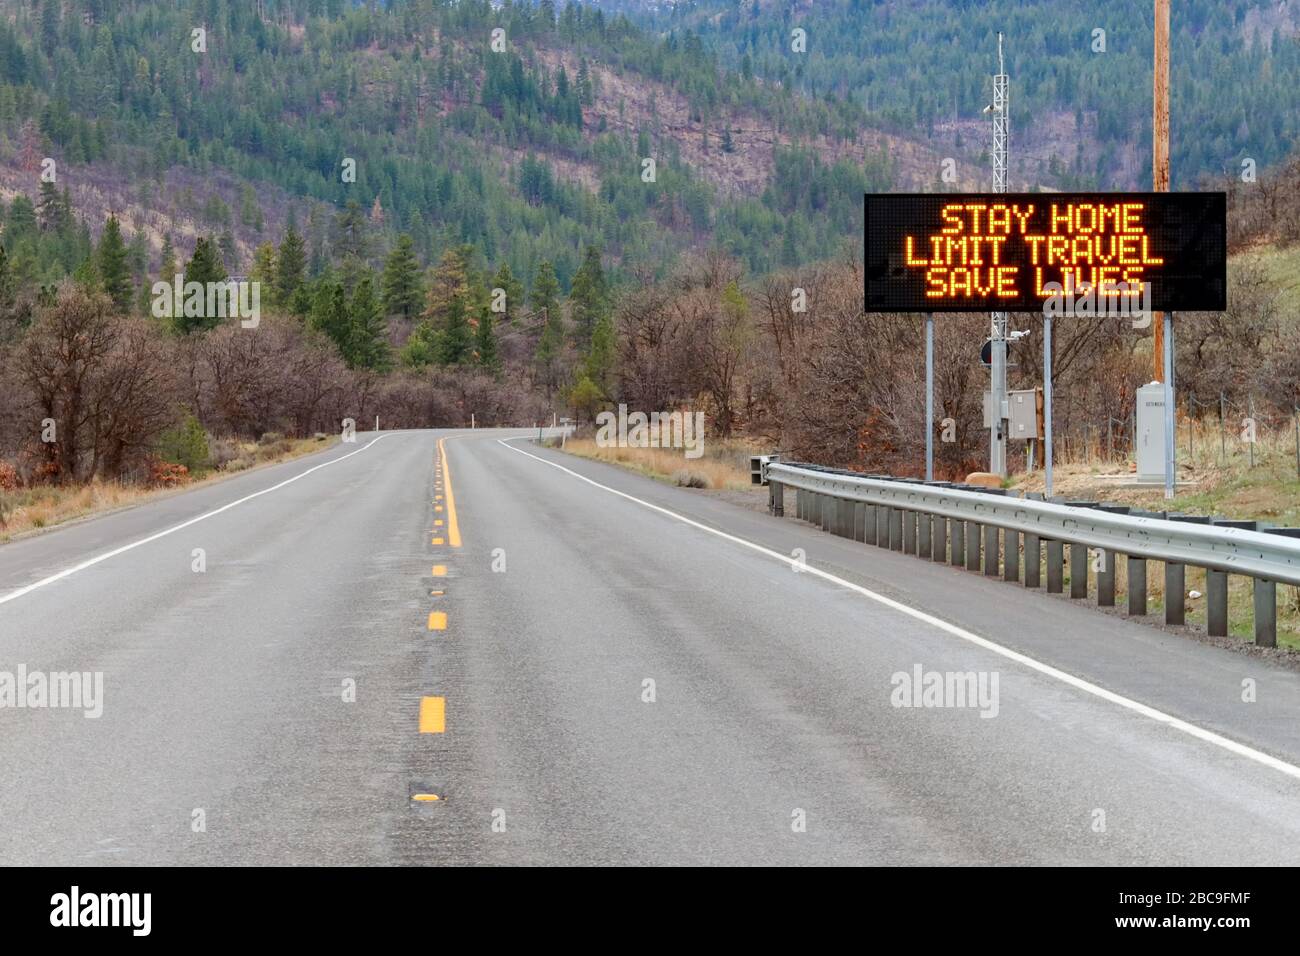 Toppenish, WA / USA - March 28, 2020: Electronic sign along U.S. Highway 97 notifying people to stay home and save lives by reducing the risk of being Stock Photo